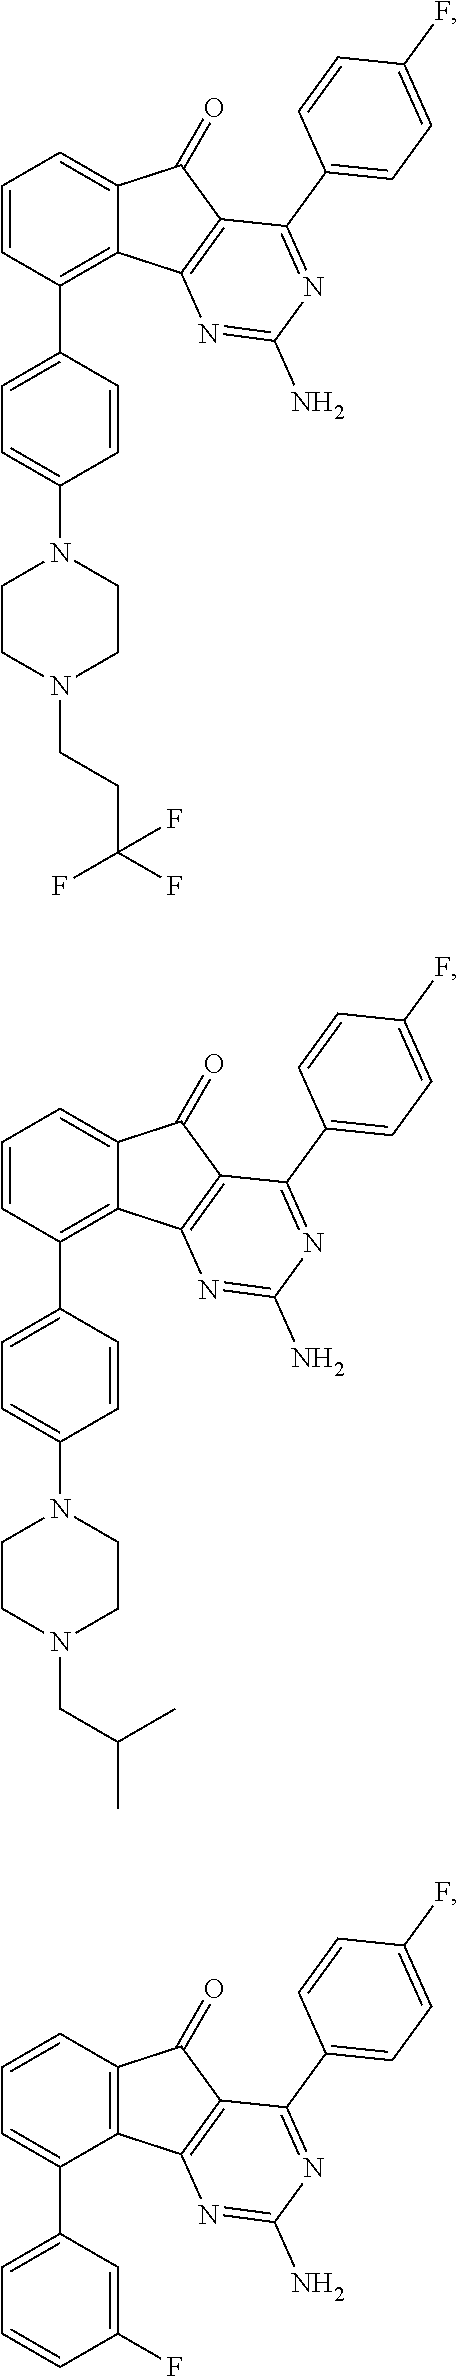 ARYL SUBSTITUTED ARYLINDENOPYRIMIDINES AND THEIR USE AS HIGHLY SELECTIVE ADENOSINE A2a RECEPTOR ANTAGONISTS